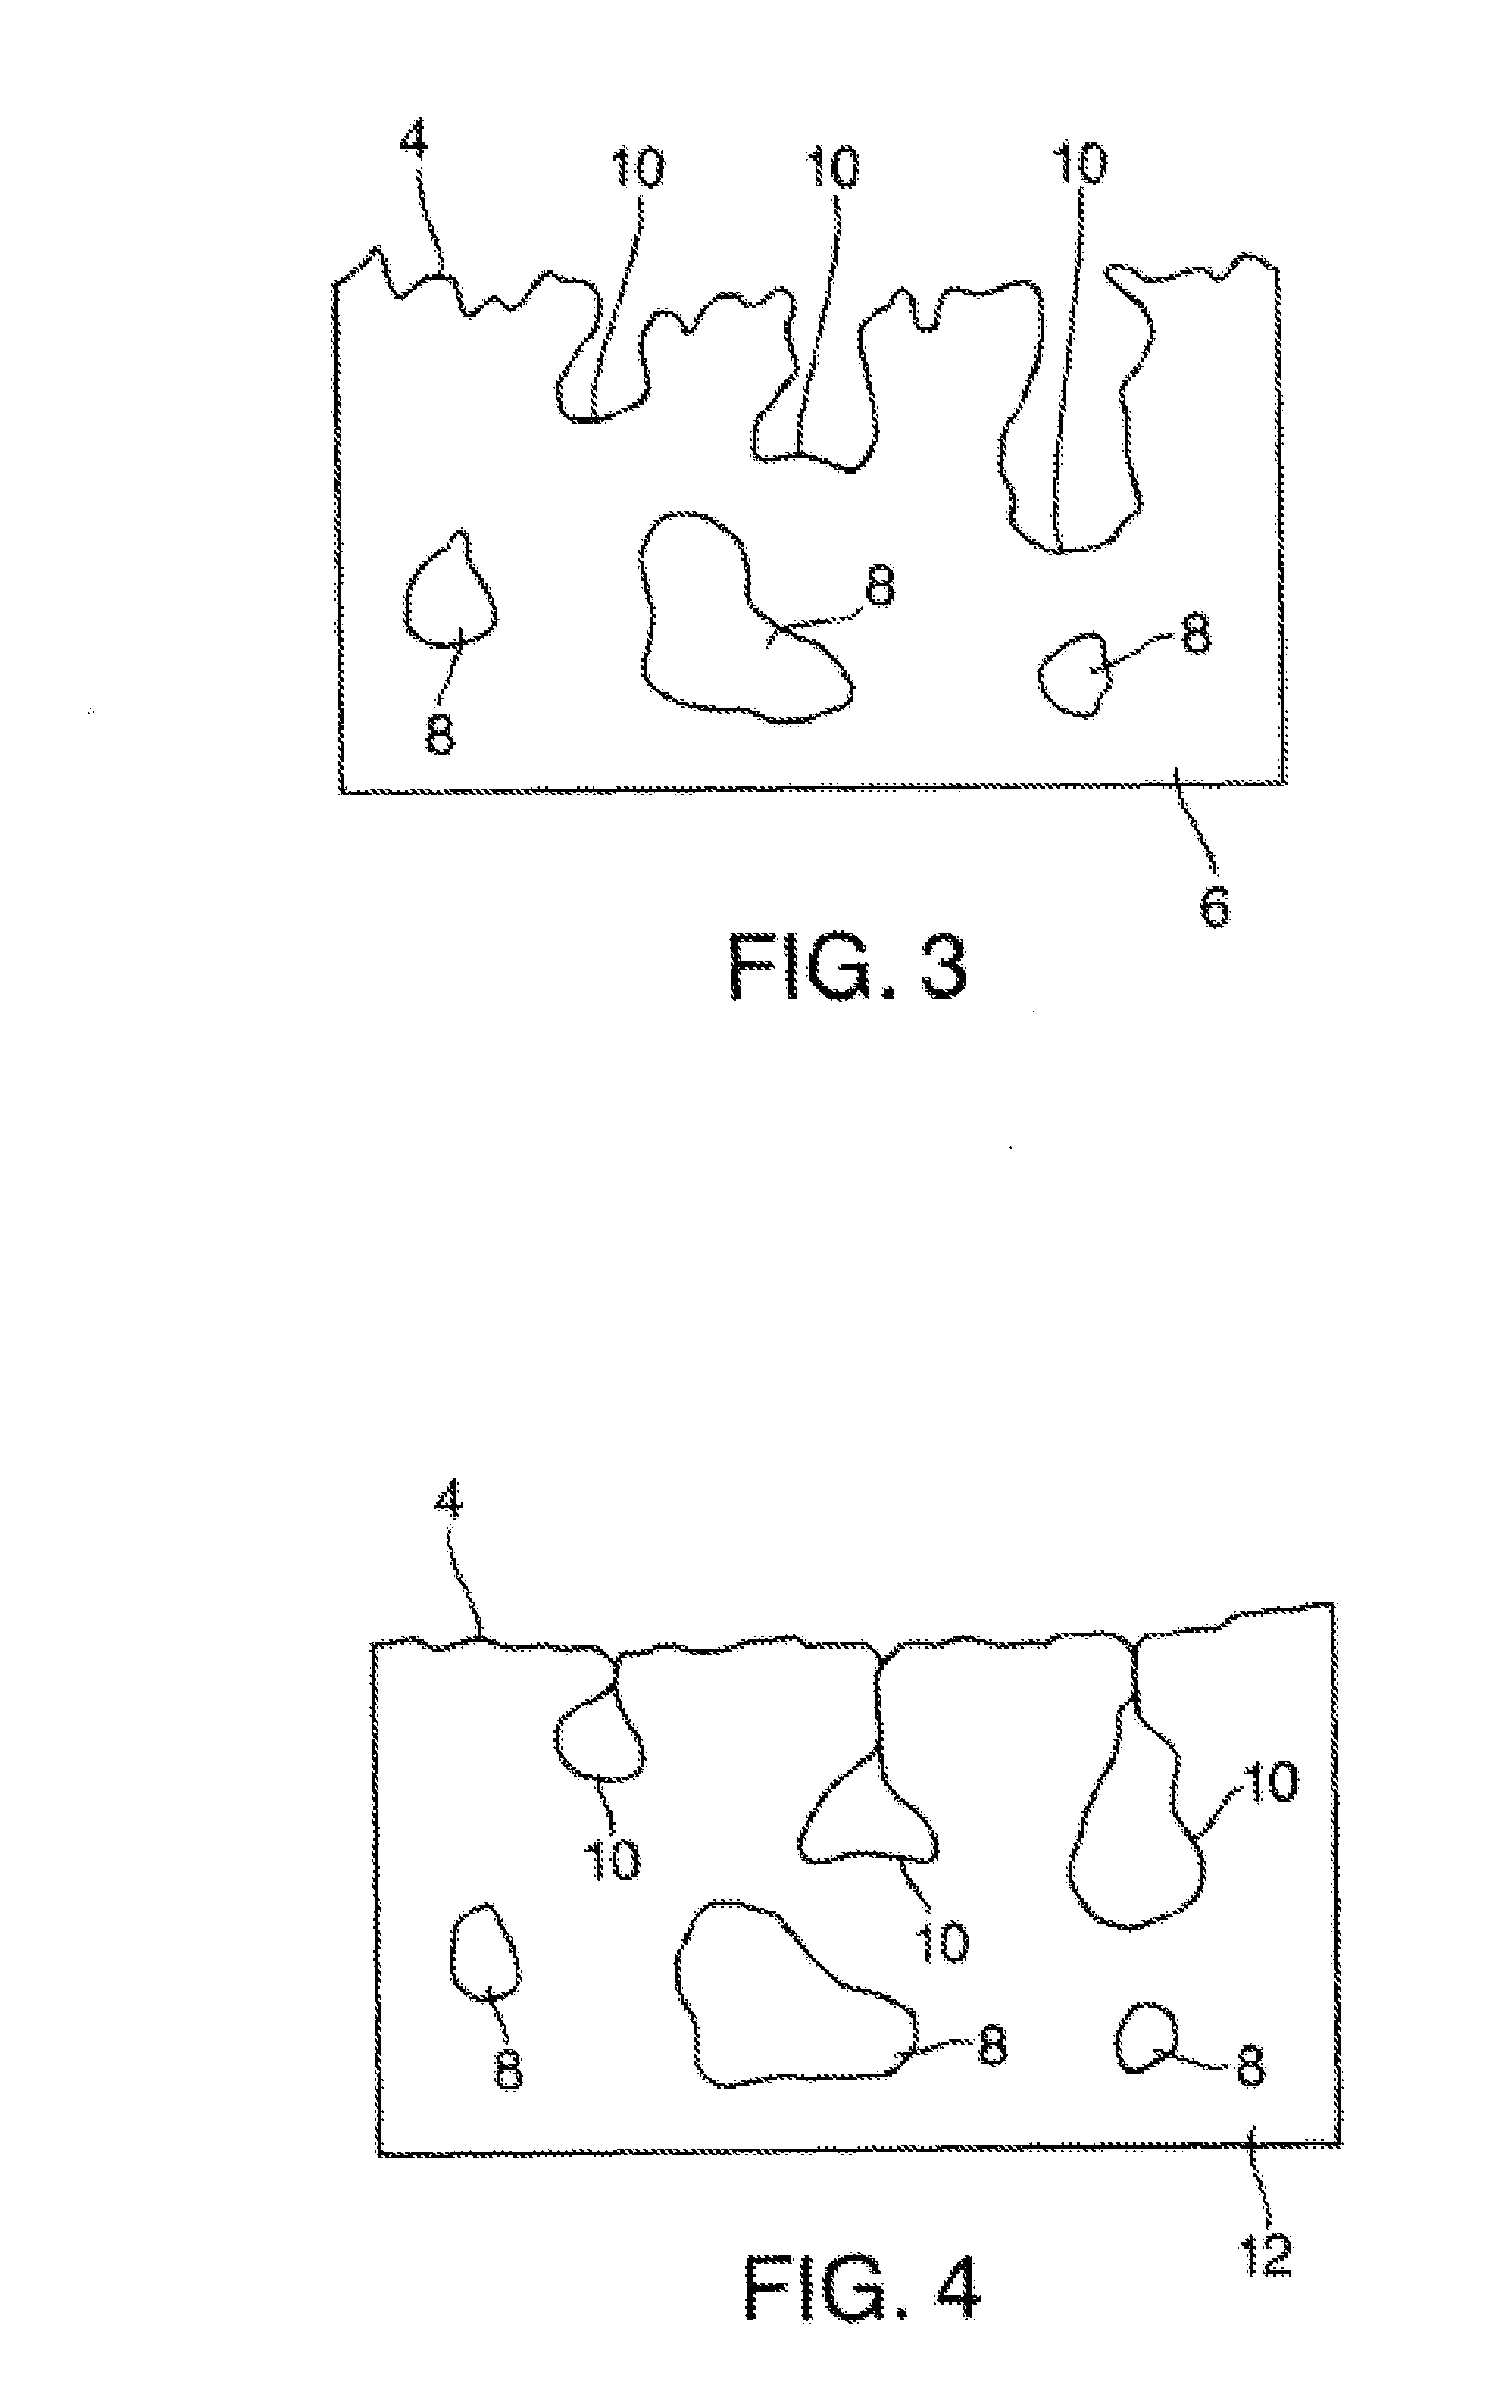 Processing of metal or alloy objects